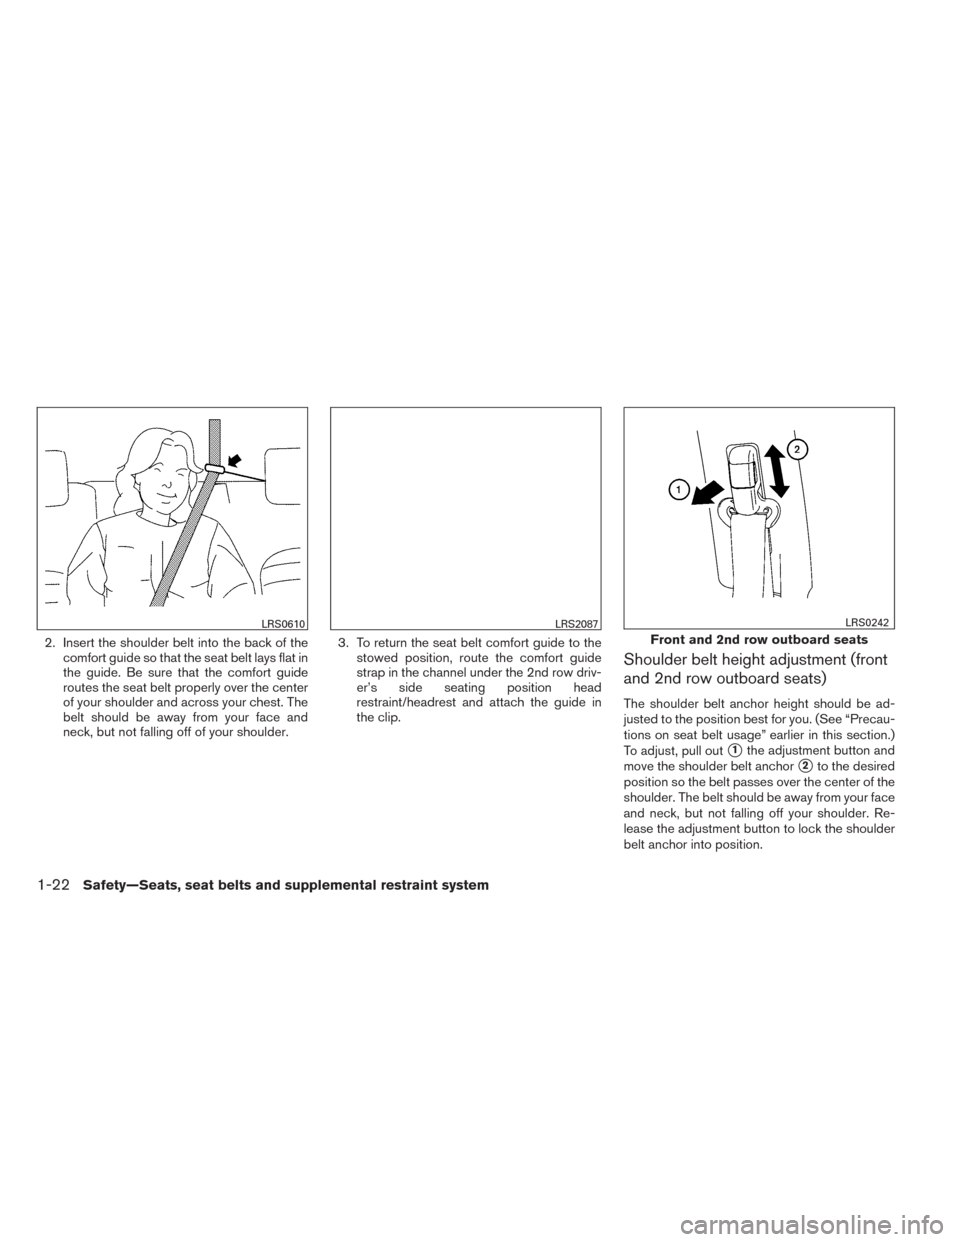 NISSAN XTERRA 2014 N50 / 2.G Owners Manual 2. Insert the shoulder belt into the back of thecomfort guide so that the seat belt lays flat in
the guide. Be sure that the comfort guide
routes the seat belt properly over the center
of your shoulde